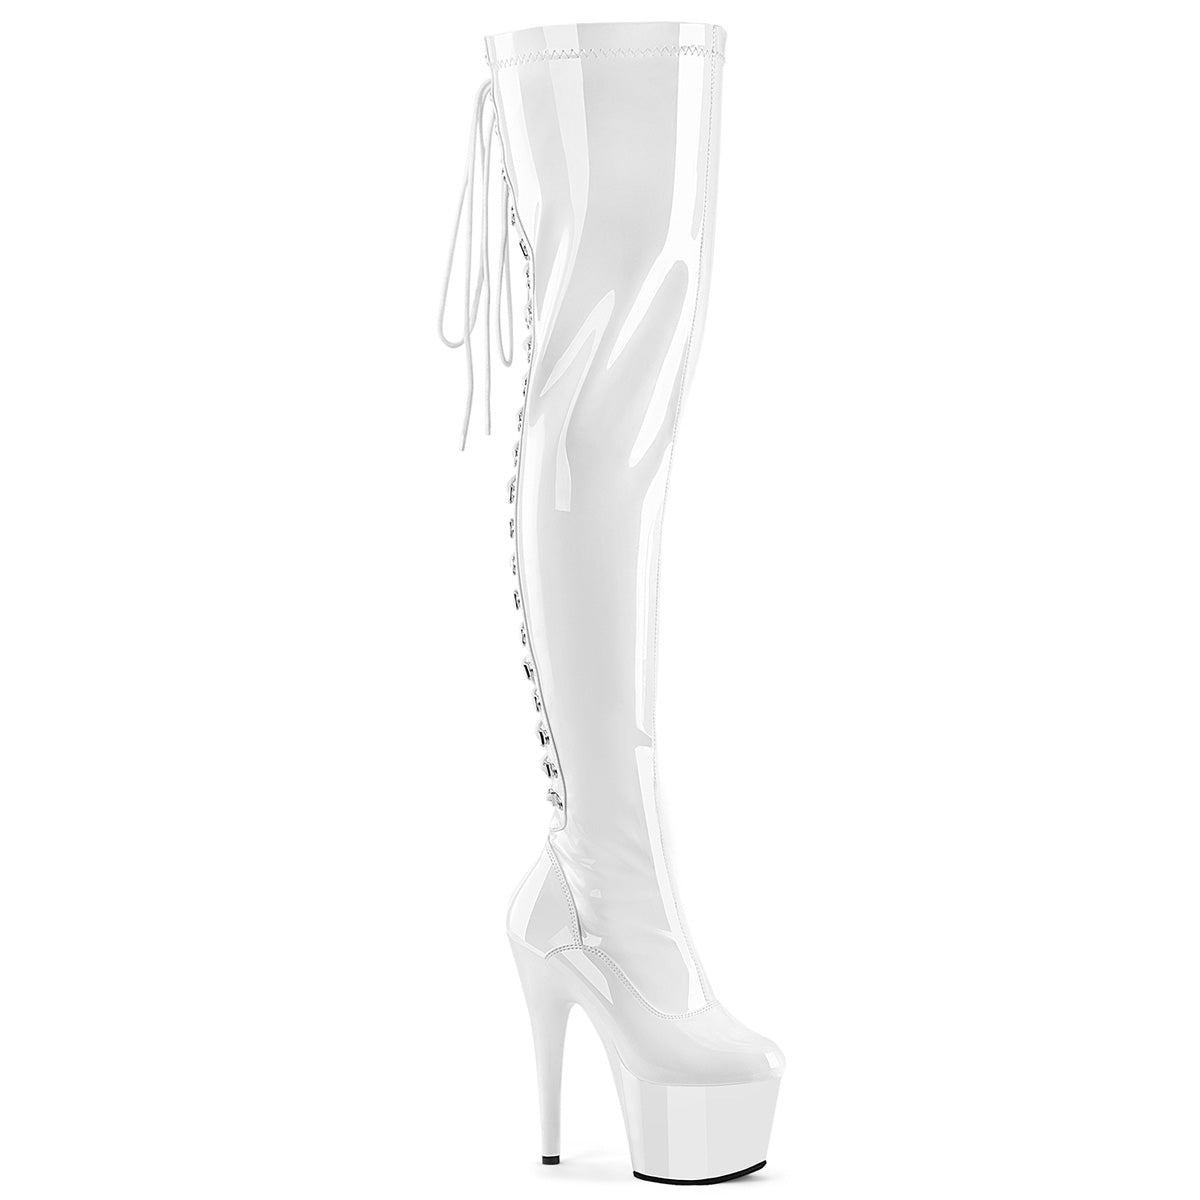 ADORE-3063 Pleaser White Patent Pole Dancing Thigh High Boots